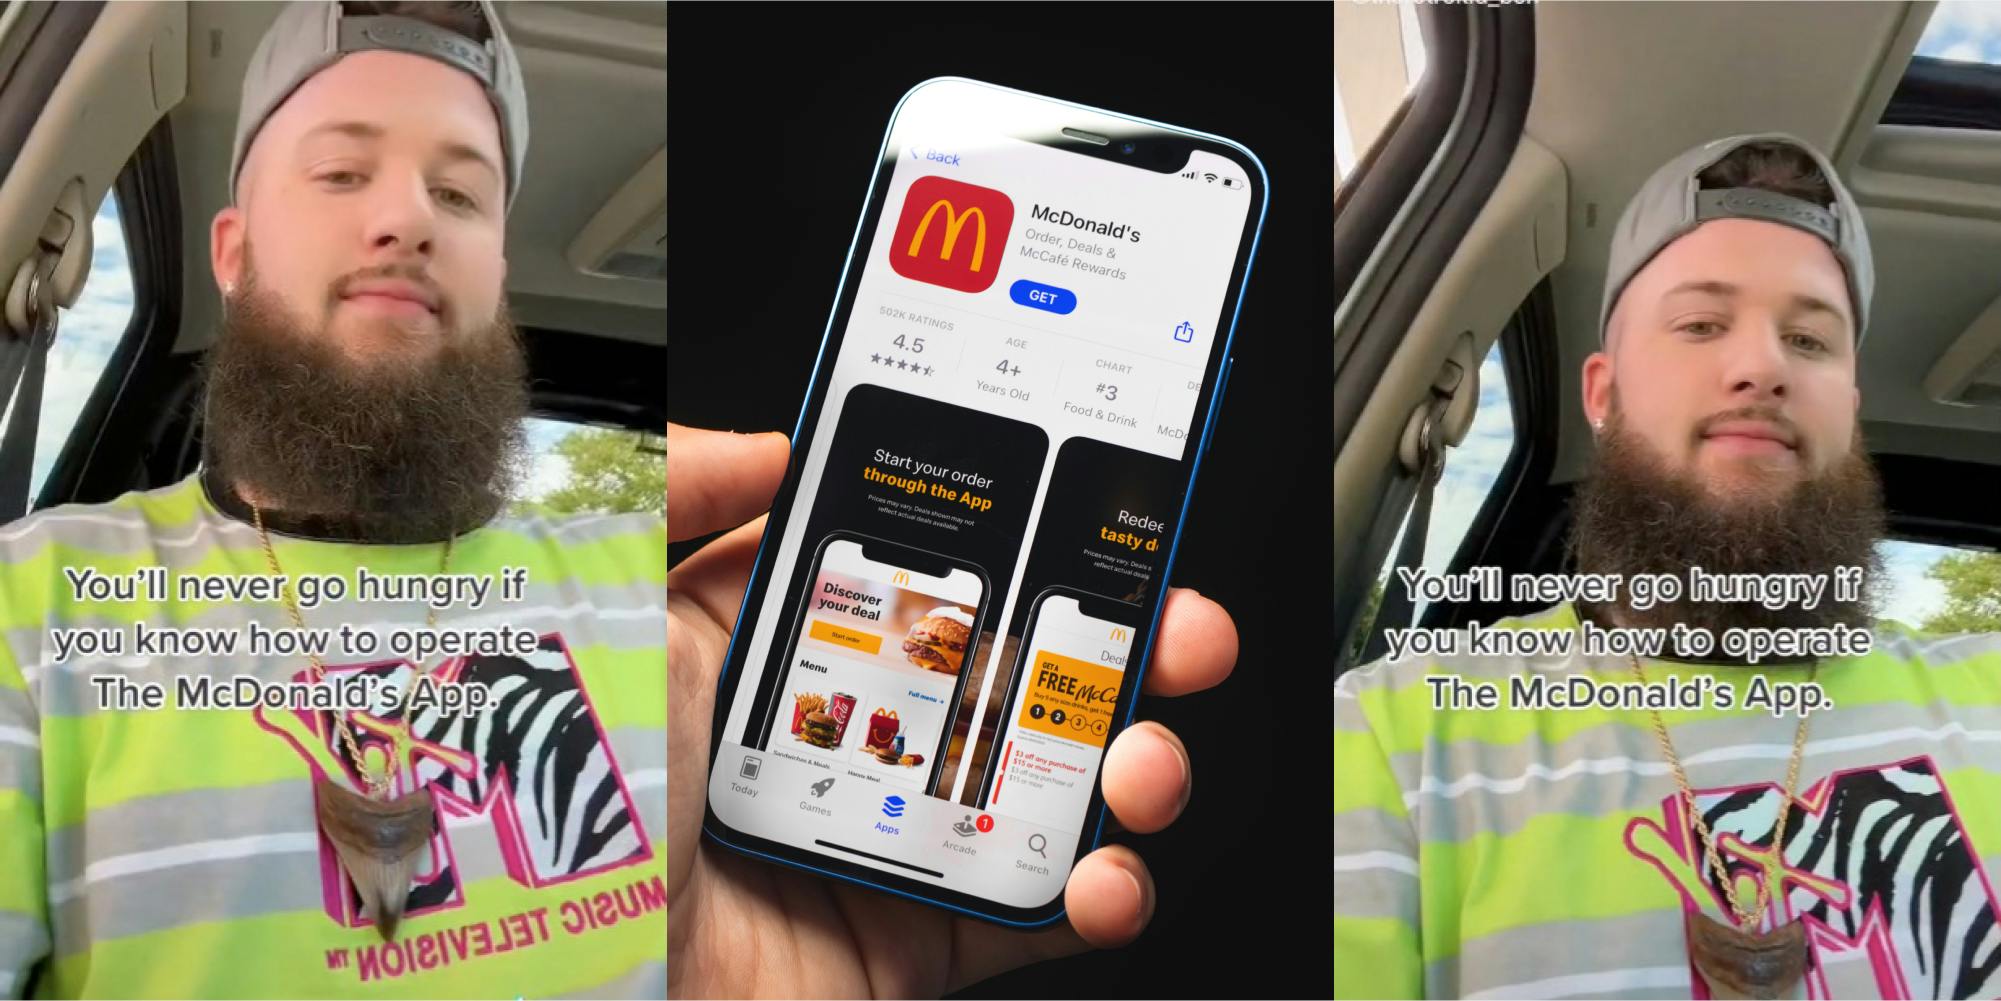 ‘I just got a double cheeseburger for 29 cents’: McDonald’s customer shares how he gets free food using the fast-food chain’s mobile app